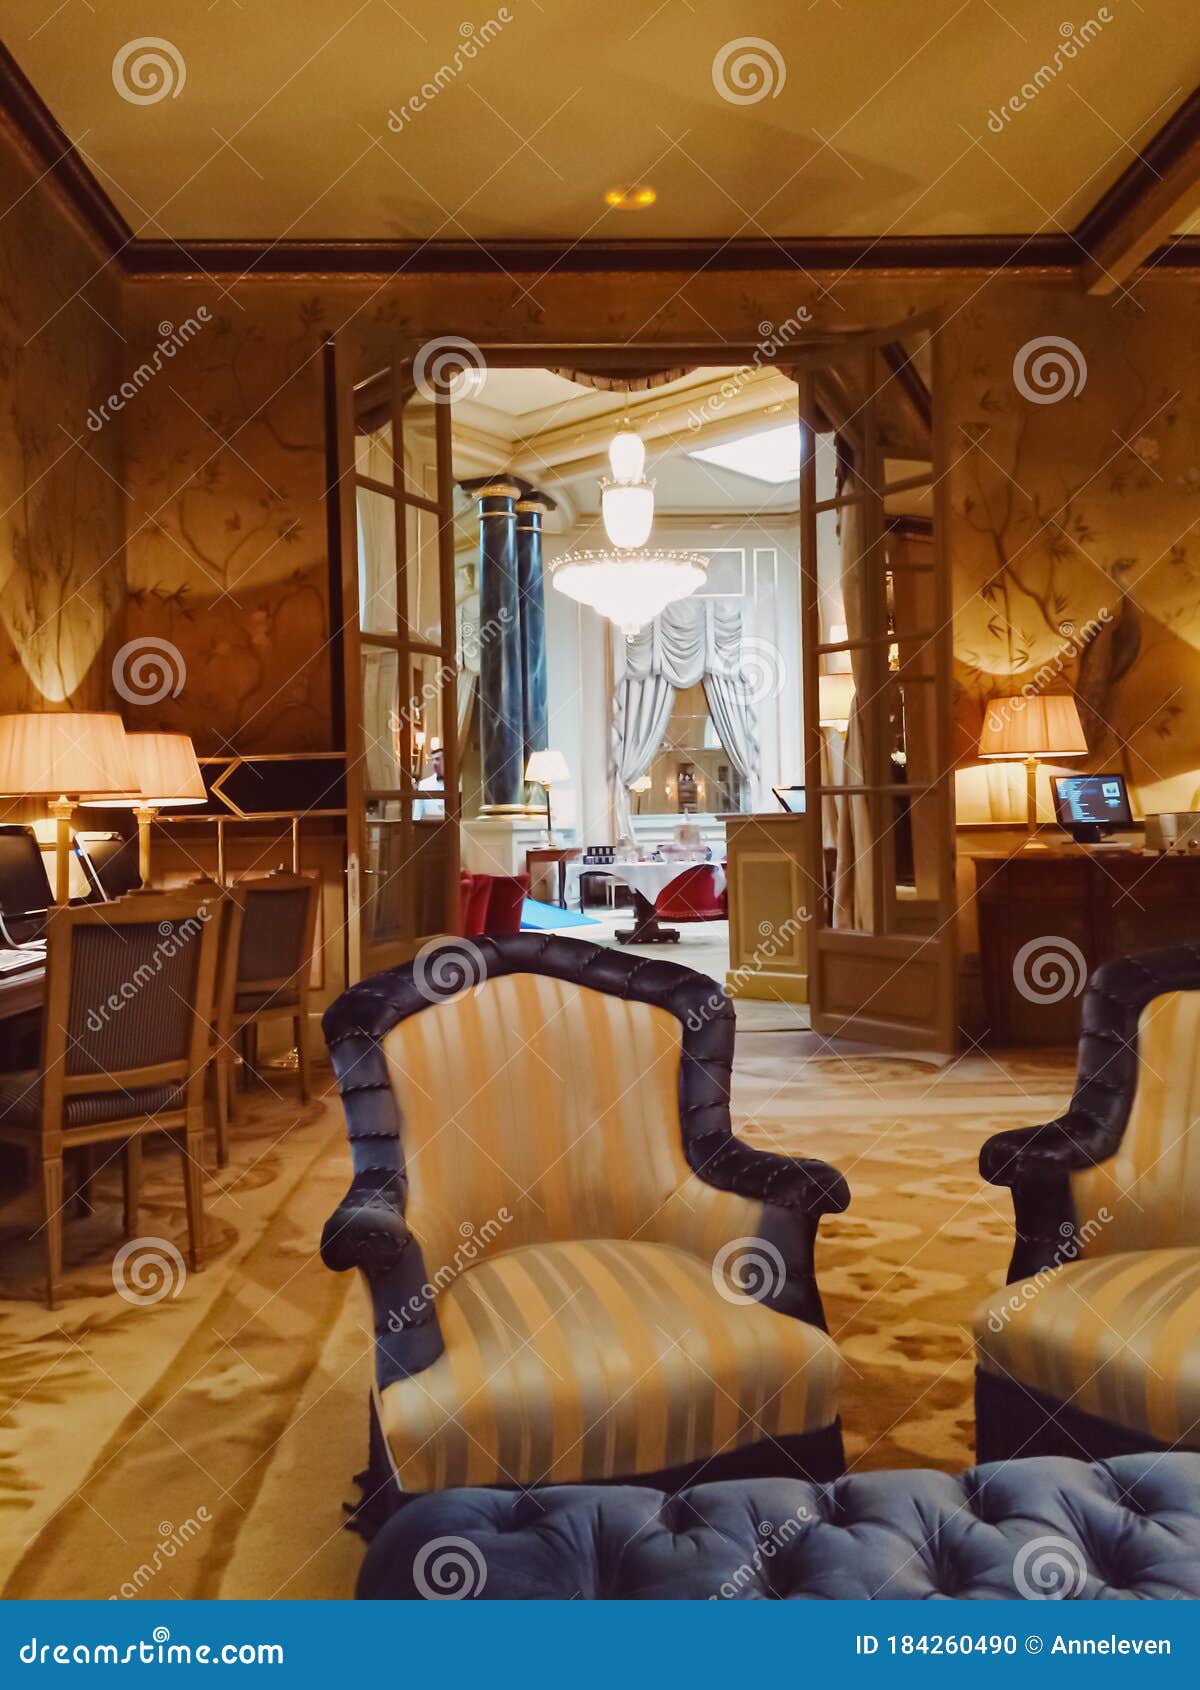 Luxury Interior Design Of Five Star Hotel El Palace In Barcelona Spain Editorial Image Image Of Restaurant Europe